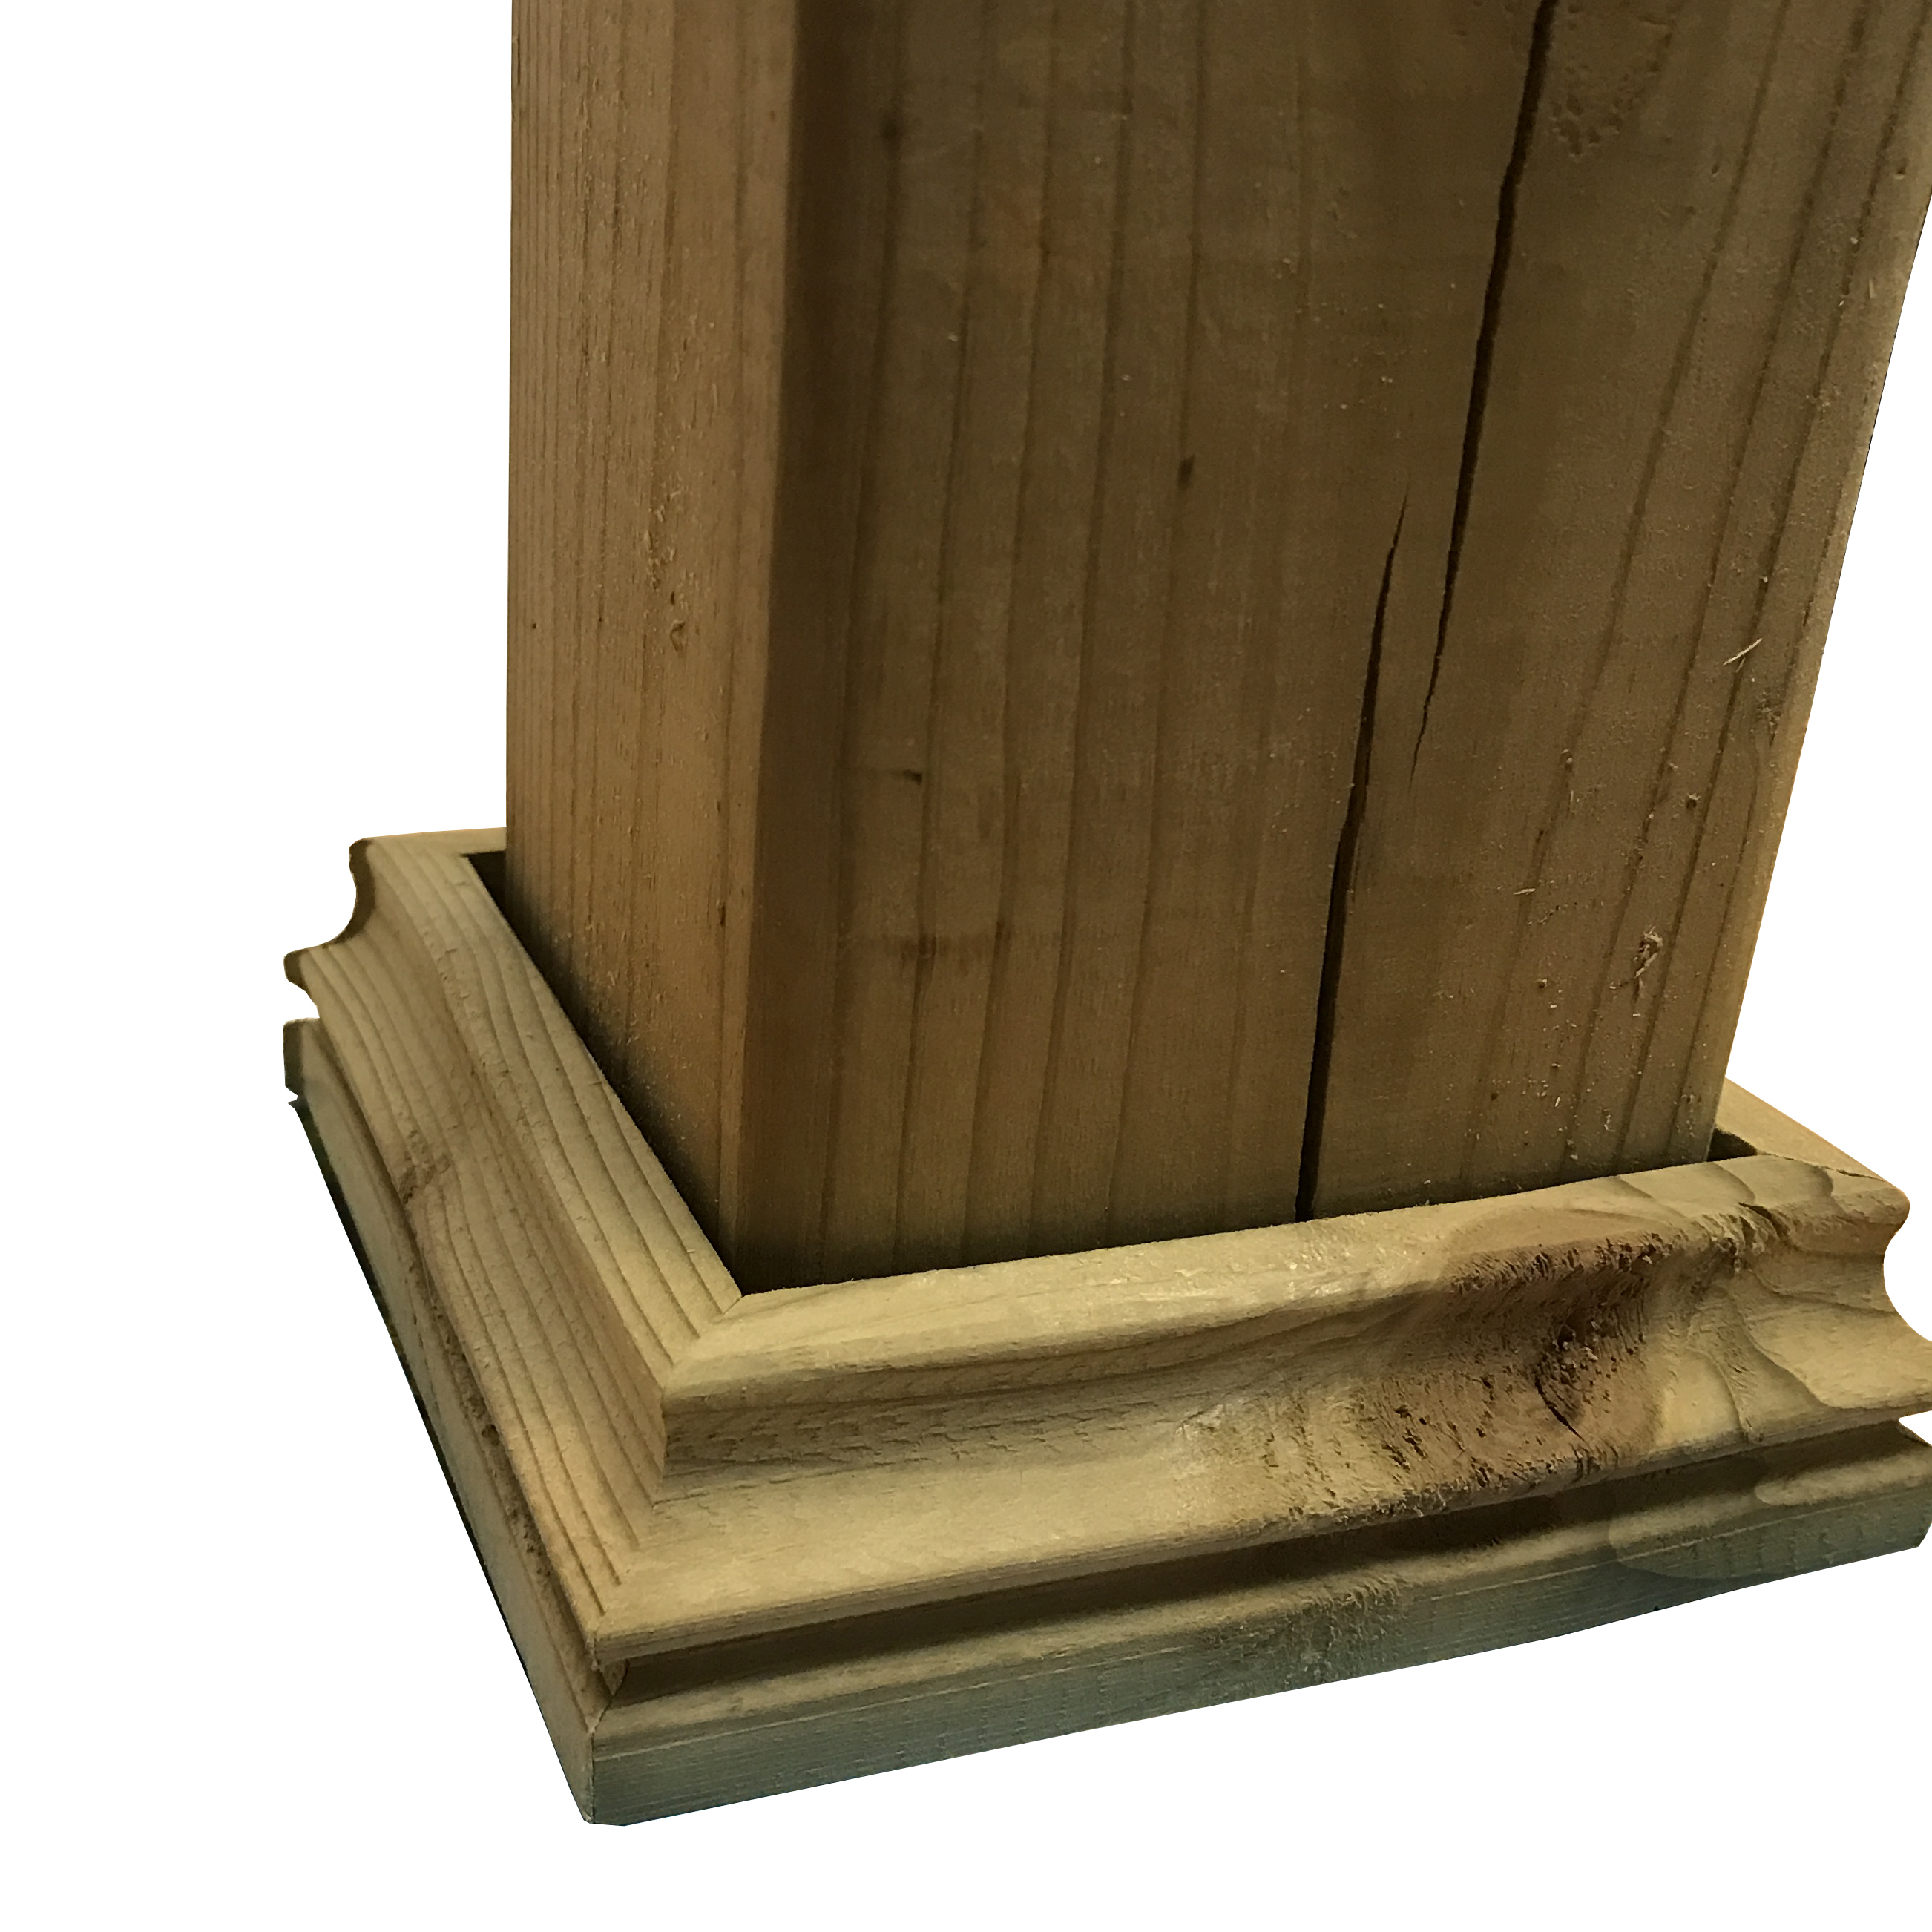 Cambium Pressure Treated Wood Decorative Post Base For Fence And throughout dimensions 2604 X 2604